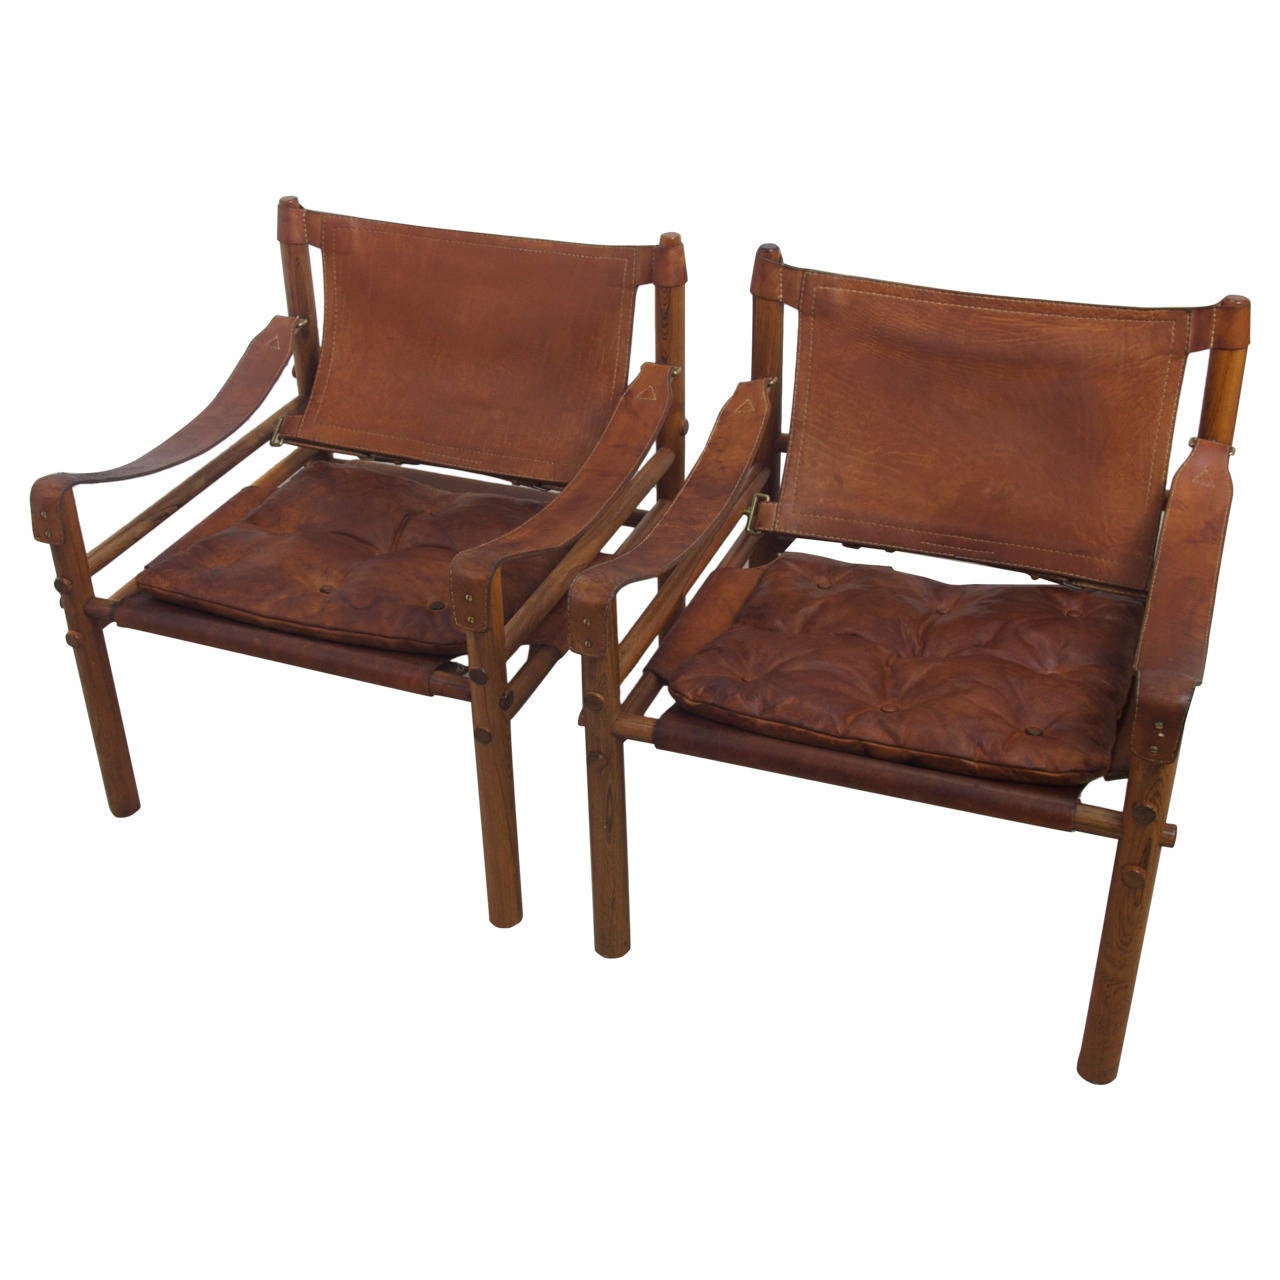 Arne Norell Rosewood and Leather "Sirocco" Safari Chairs